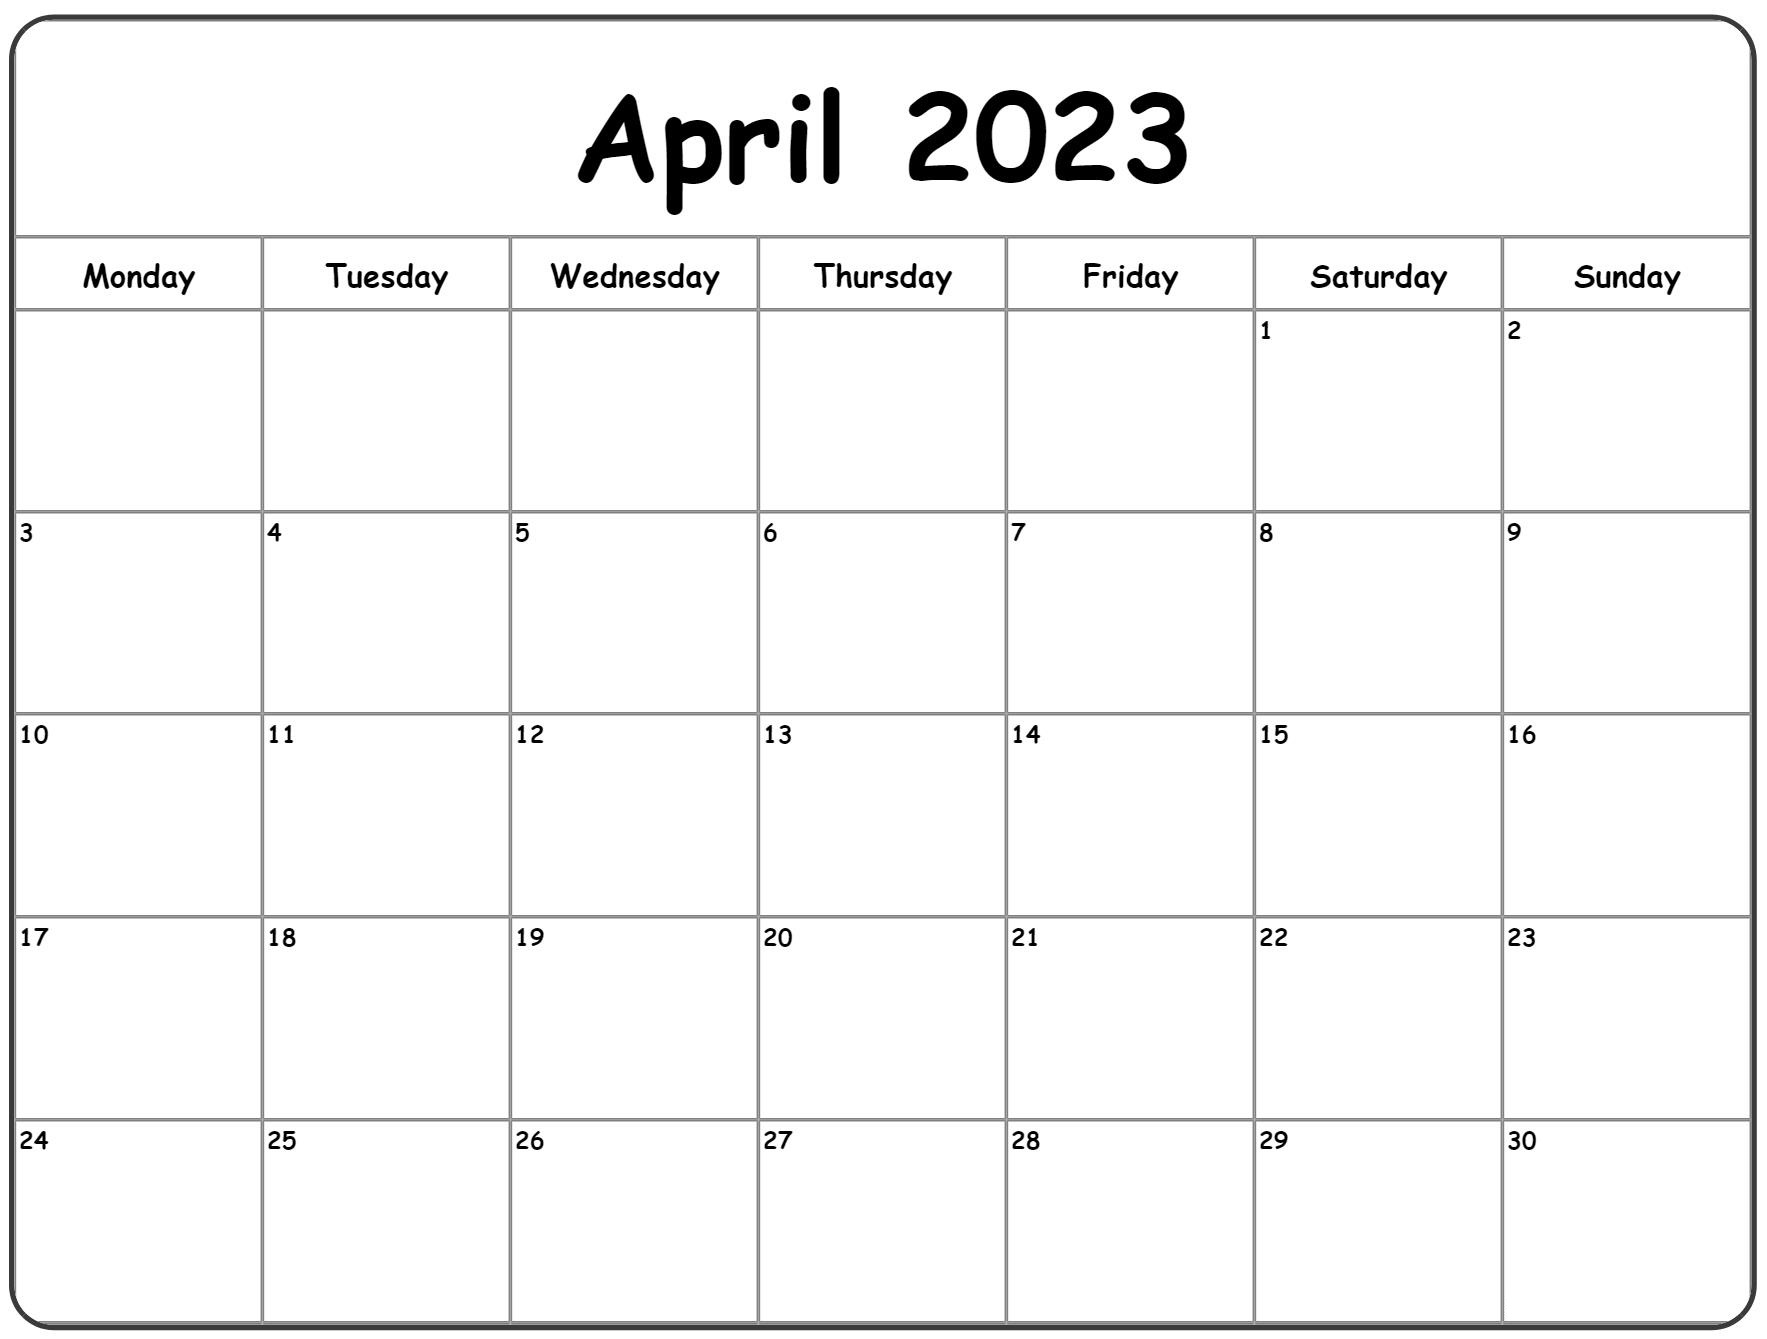 Printable April 2023 Calendar Check Out The Work Planner